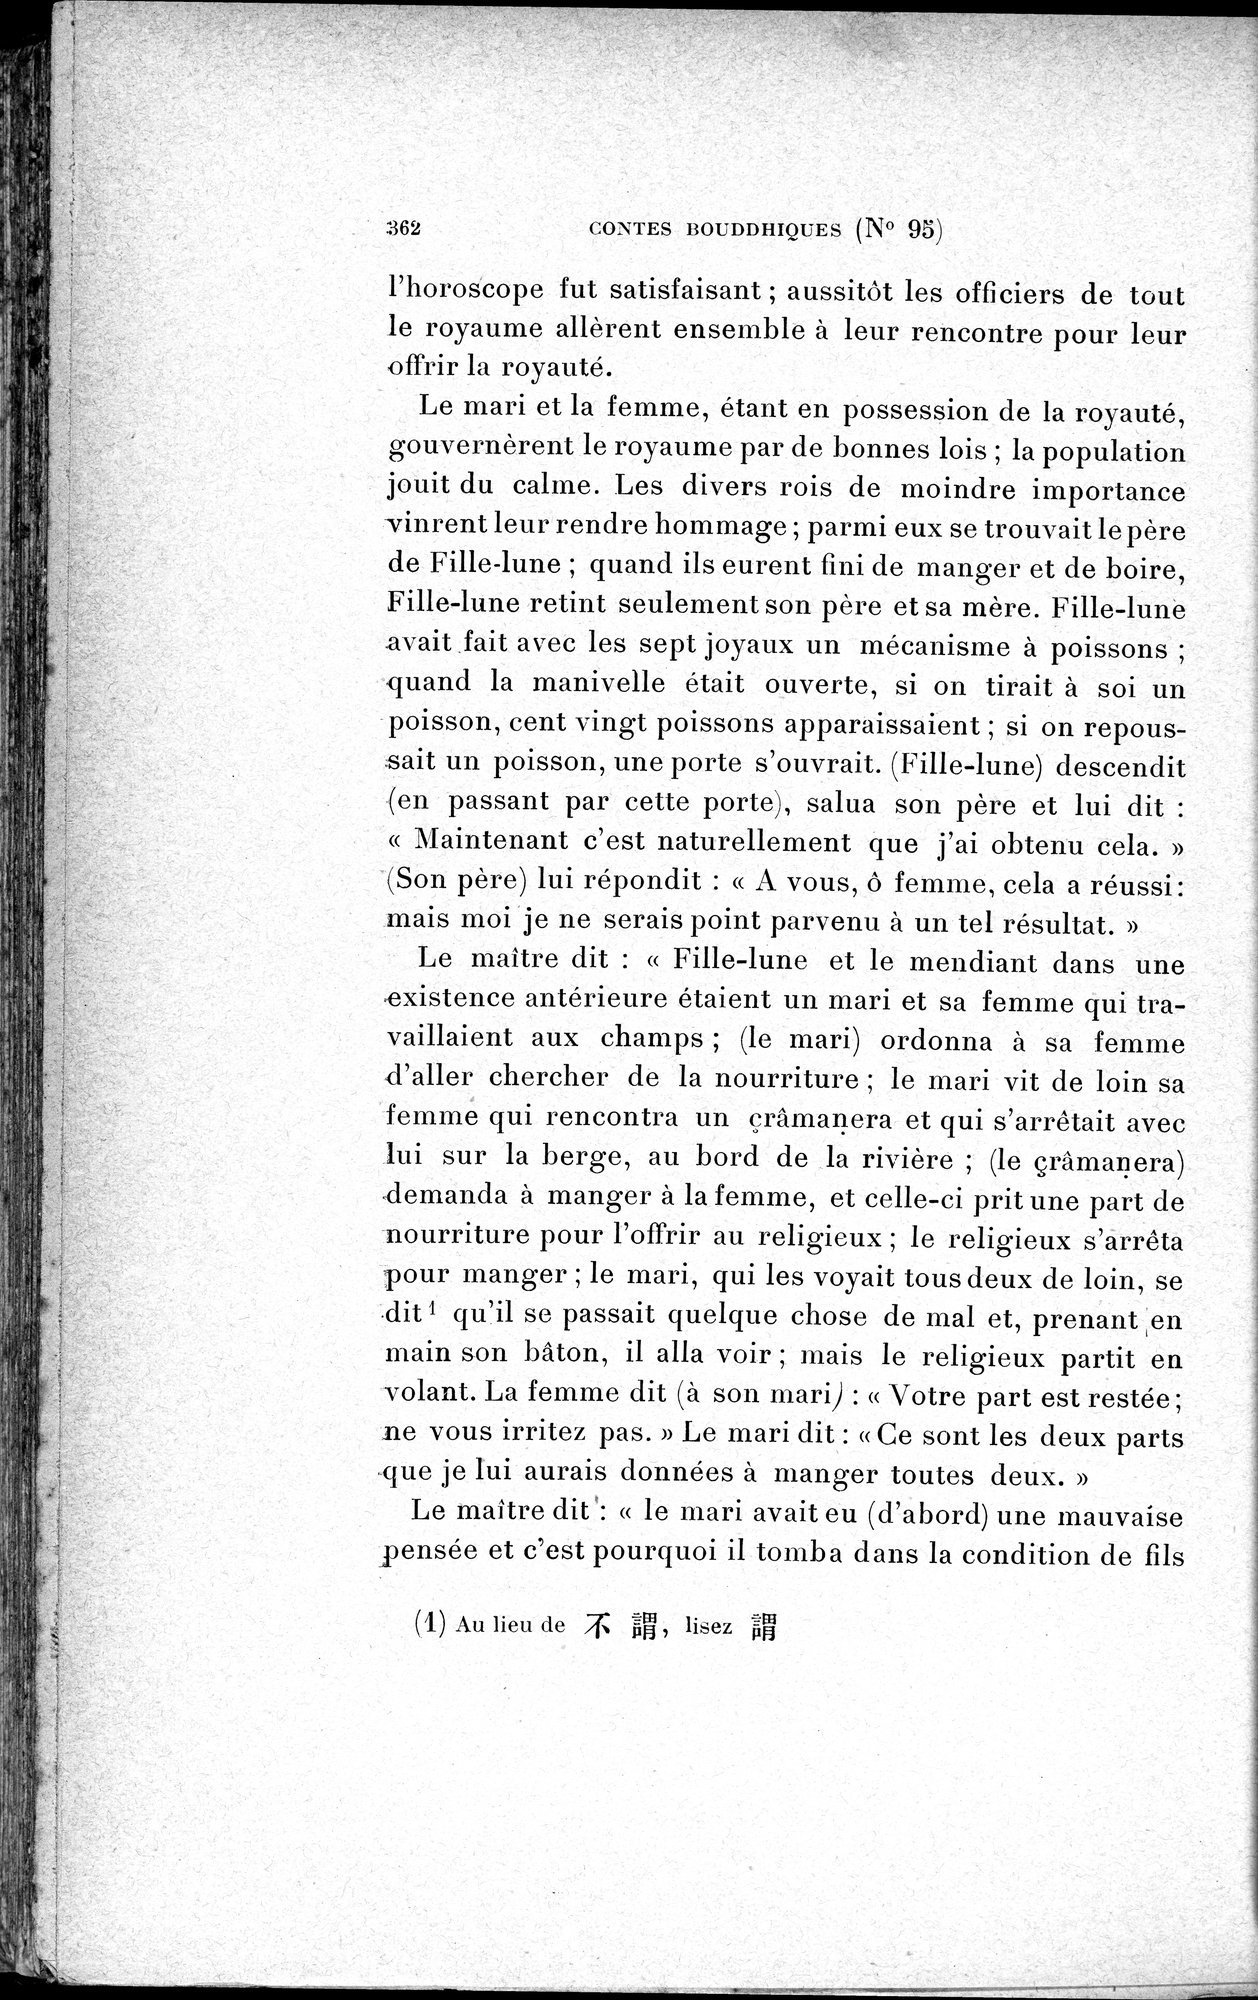 Cinq Cents Contes et Apologues : vol.1 / Page 396 (Grayscale High Resolution Image)